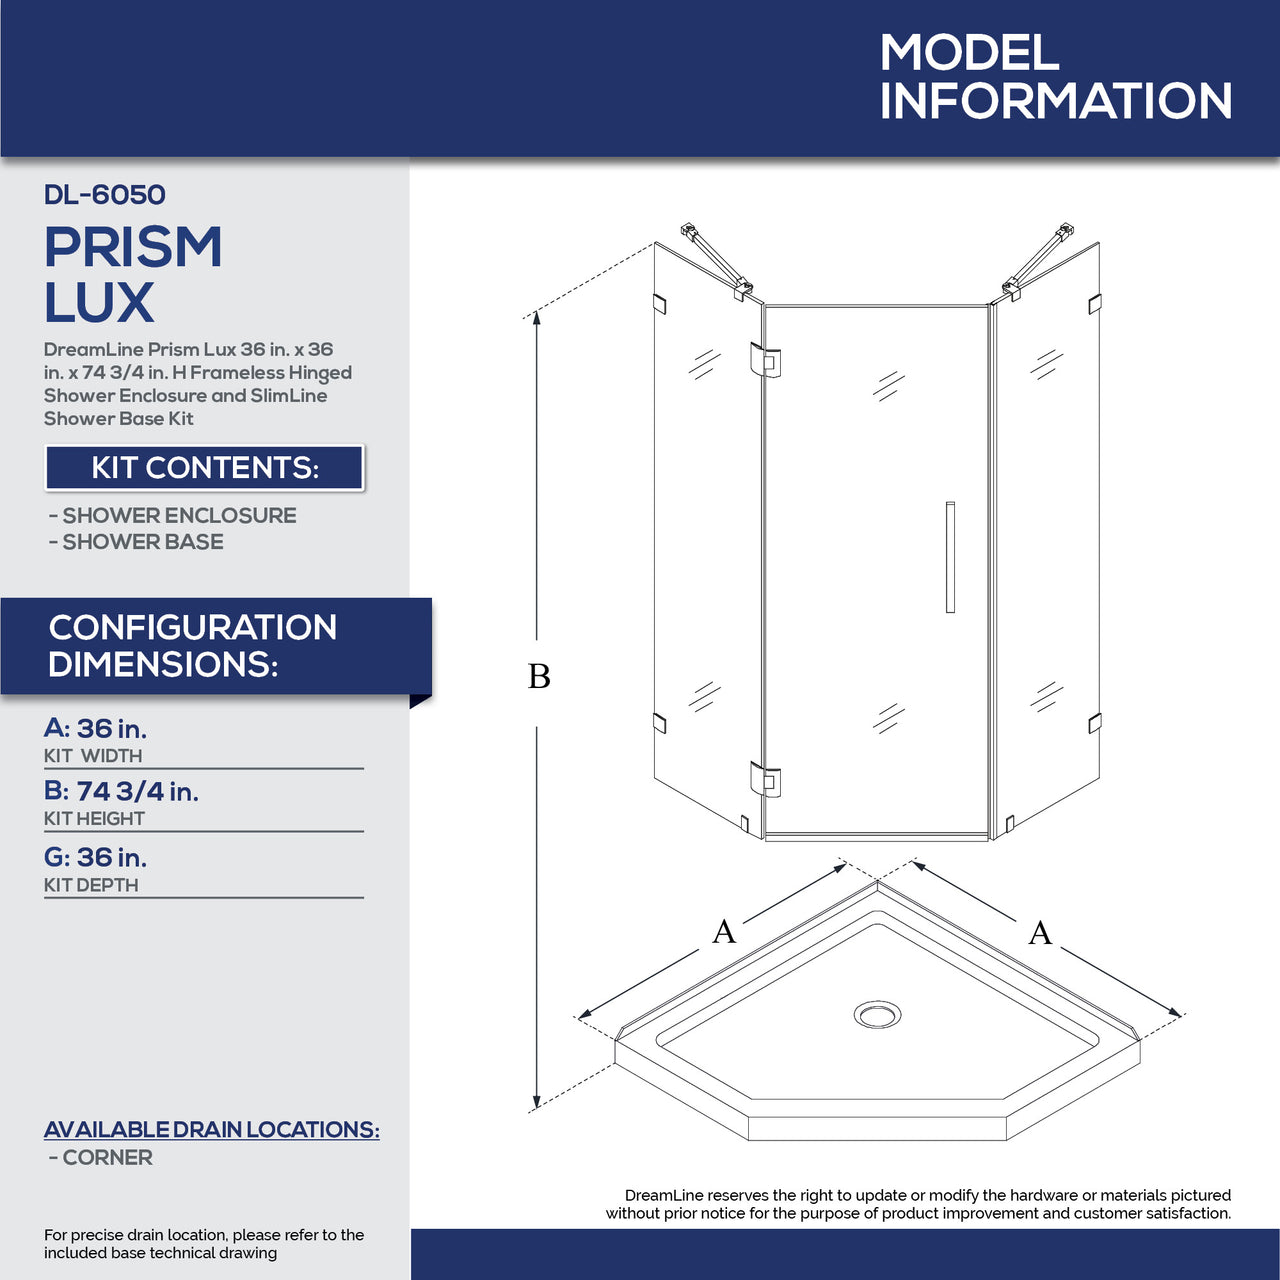 DreamLine Prism Lux 36 in. x 36 in. x 74 3/4 in. H Frameless Hinged Shower Enclosure and SlimLine Shower Base Kit - BNGBath